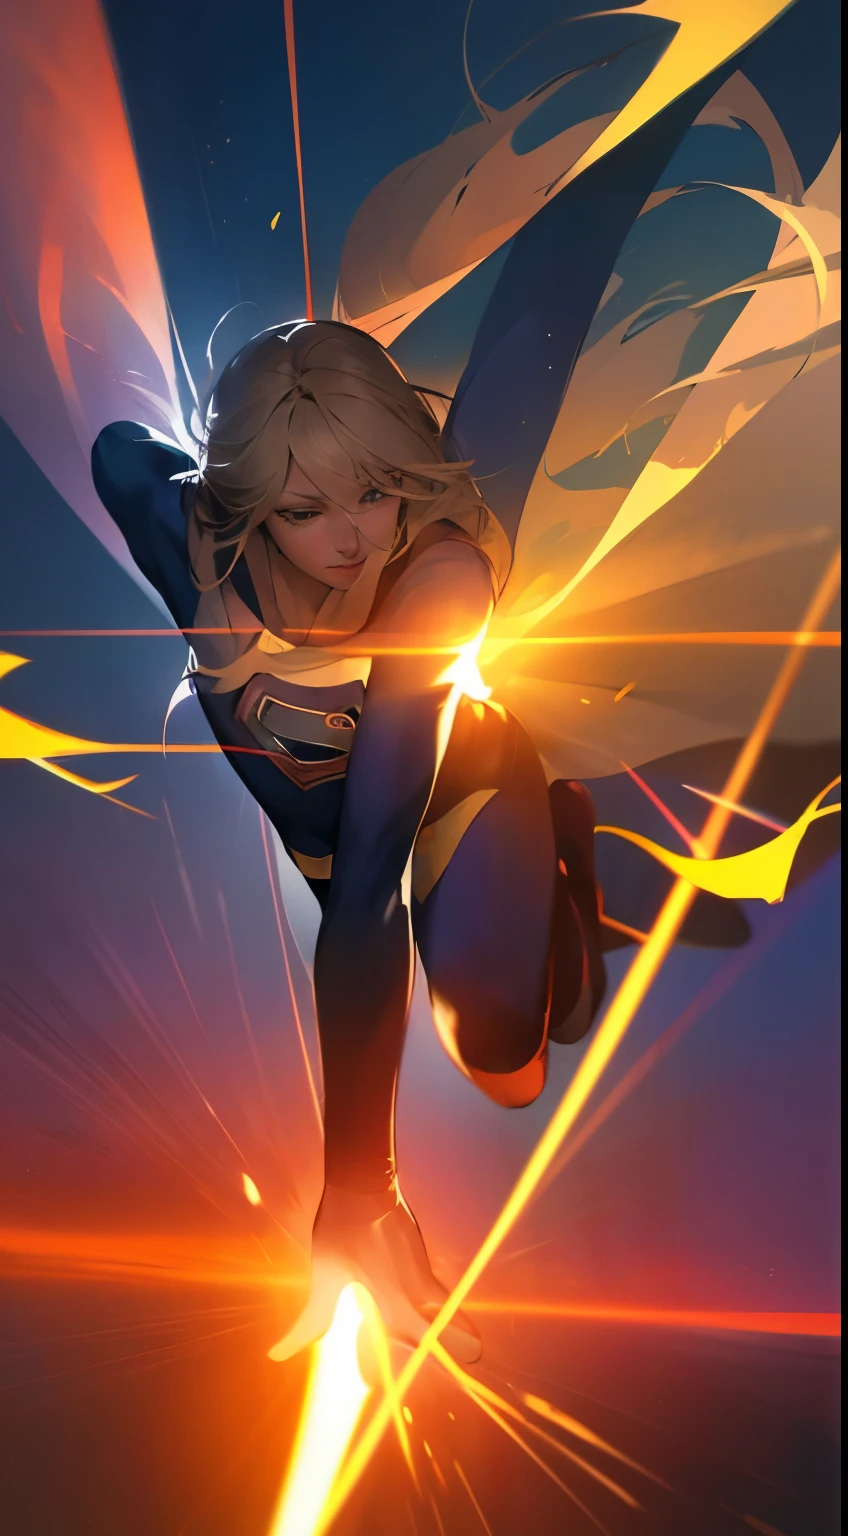 (best quality, vivid colors:1.2, anime:1.1), ULTRA-DETAILED,(realistic:1.37), DC comics character, SUPERGIRL, FLYING between CLOUDS, supersonic VELOCITY, sharp focus, vibrant colors, dynamic pose, flowing cape, intense action, strong wind effects, high speed motion, intense energy, blue sky backdrop, white fluffy clouds, dazzling sunlight.